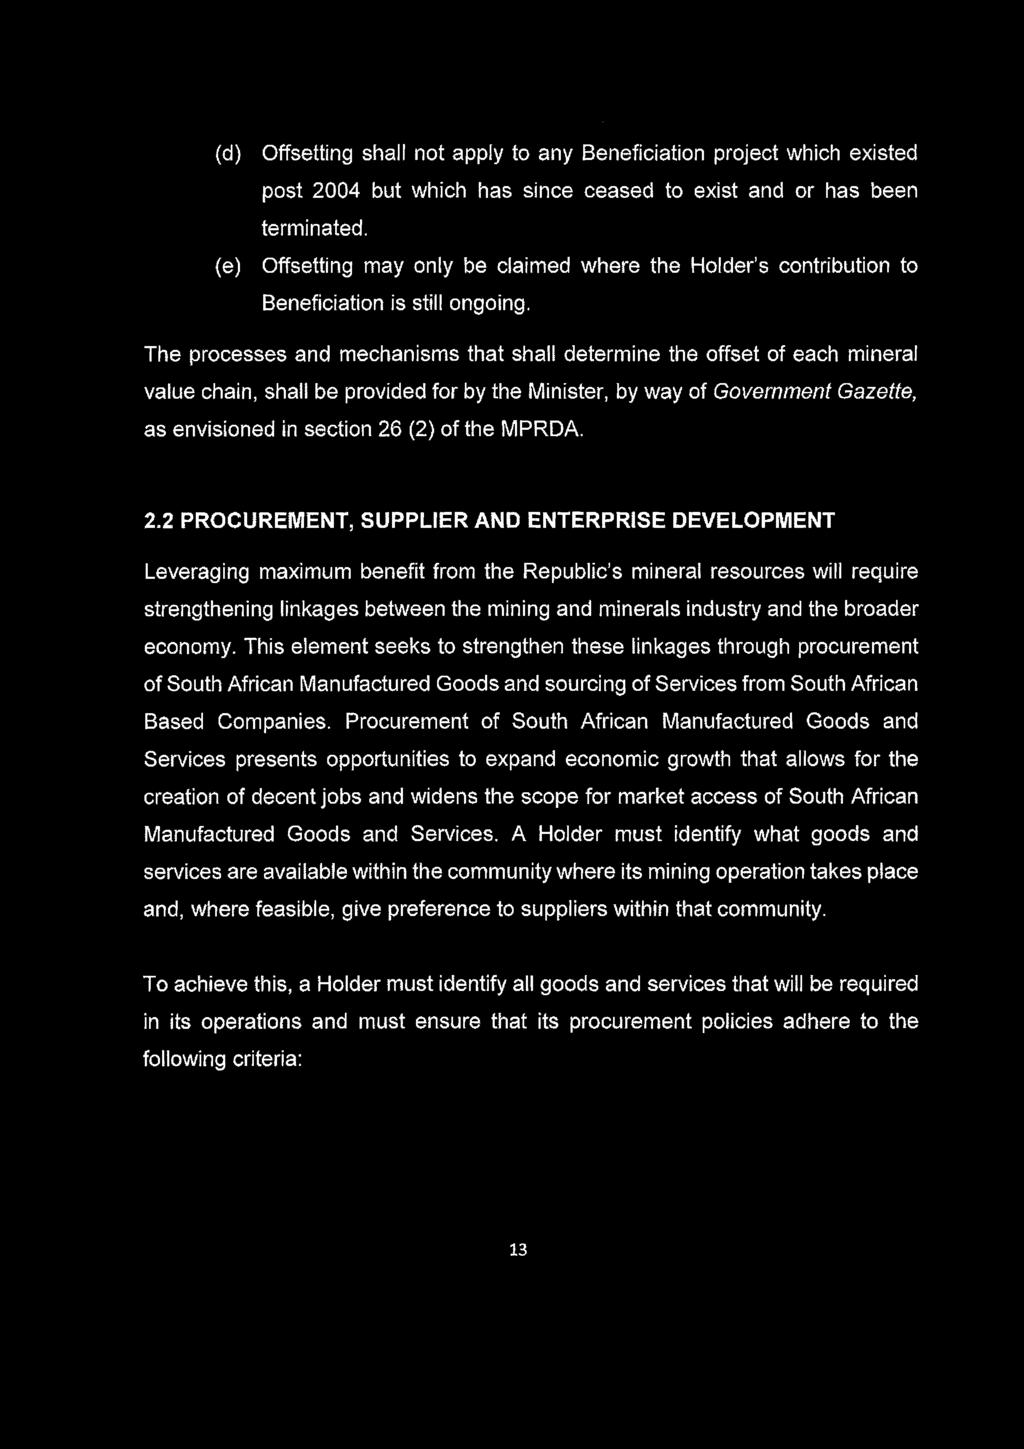 STAATSKOERANT, 15 JUNIE 2017 No. 40923 23 (d) (e) Offsetting shall not apply to any Beneficiation project which existed post 2004 but which has since ceased to exist and or has been terminated.